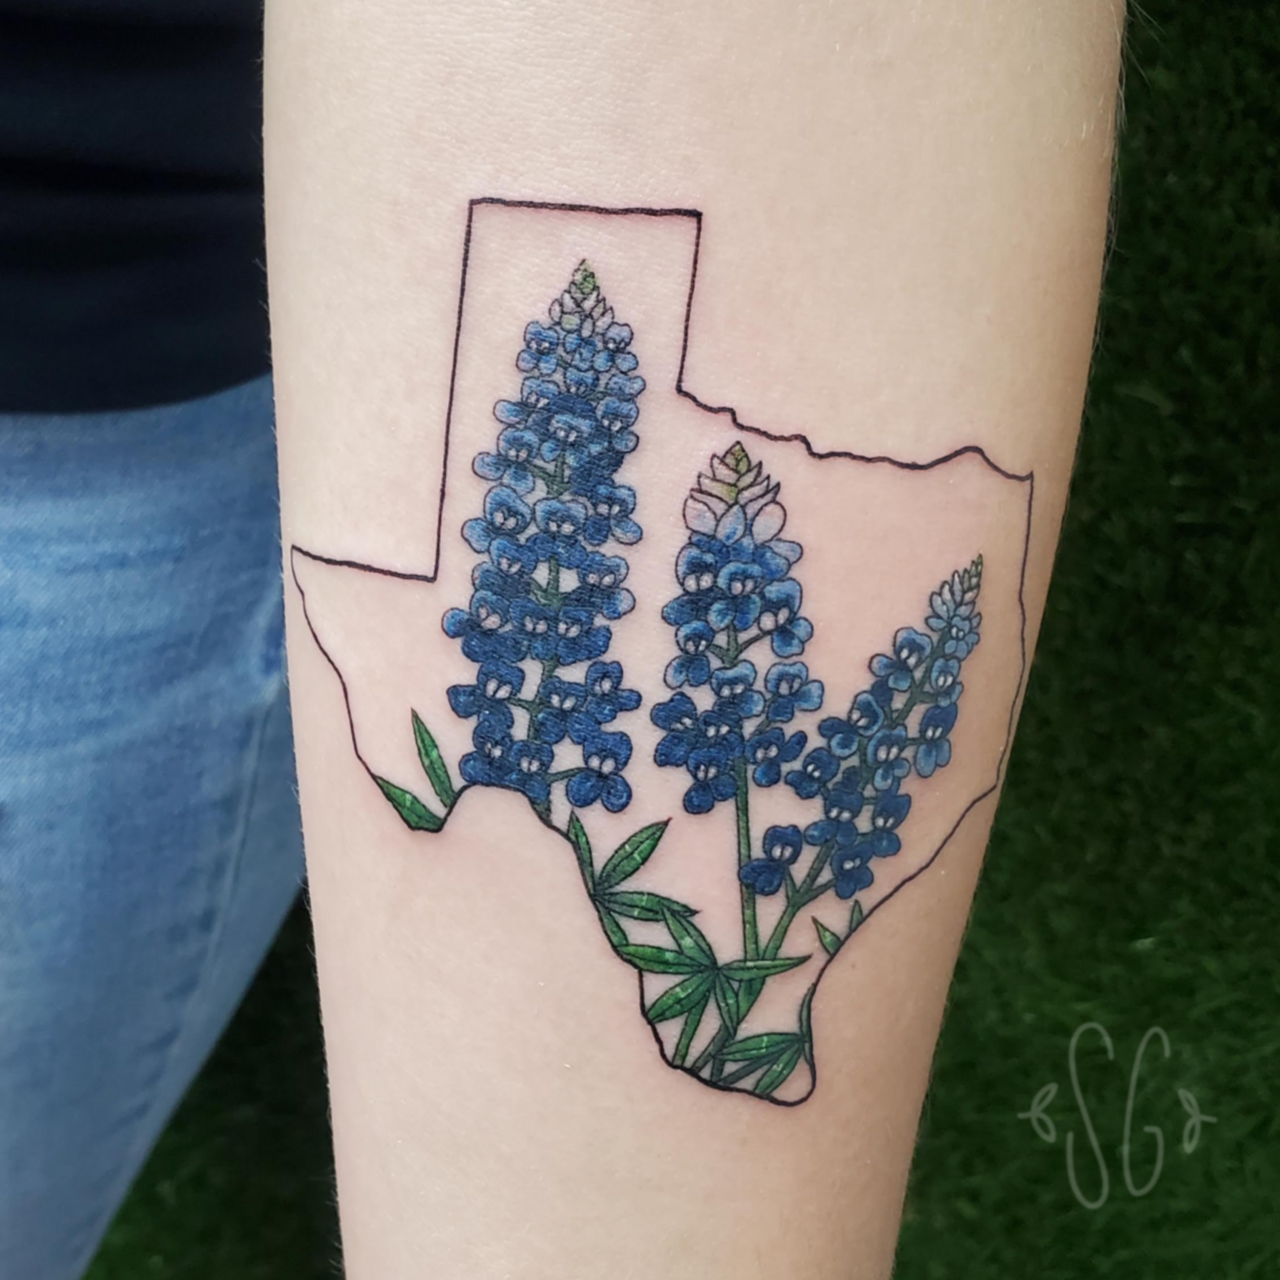 The Inkery - @sstattoos did this beautiful blue bonnet, because #TEXAS!  #floral #flower #ink #tattoo #tattoos #theinkery | Facebook